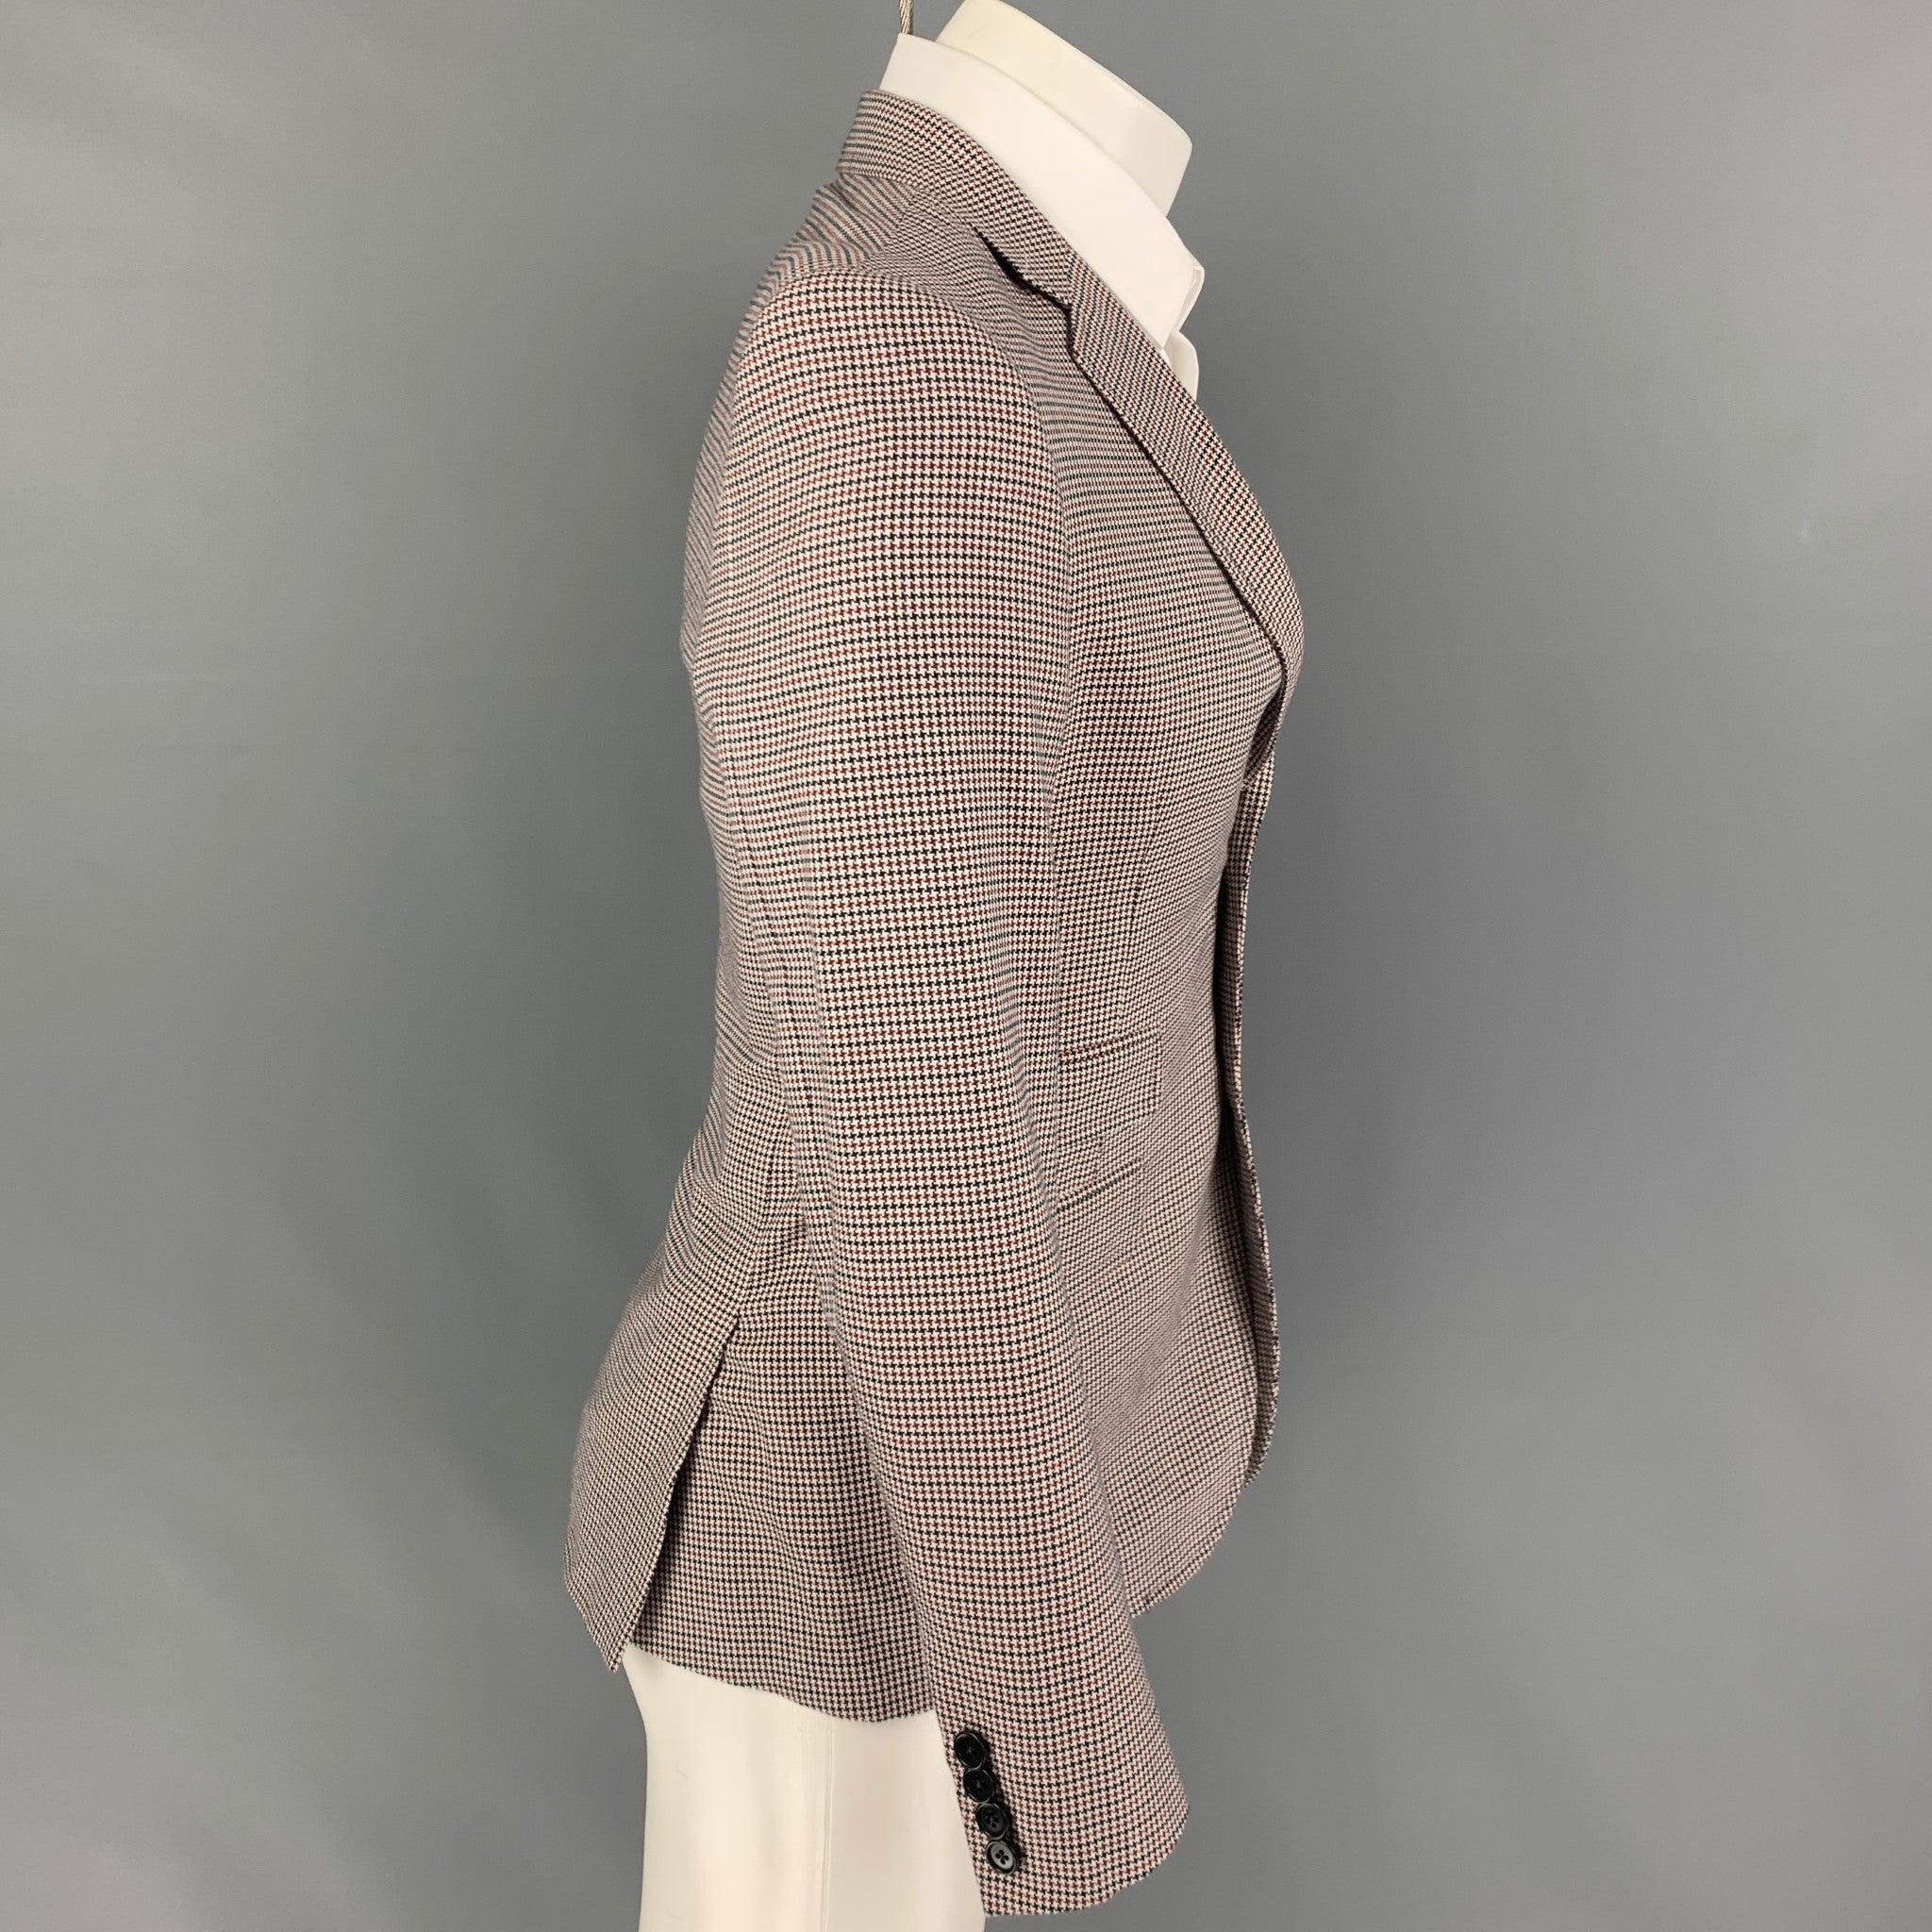 BAND OF OUTSIDERS
sport coat comes in a white & navy houndstooth wool with a full liner featuring a notch lapel, flap pockets, double back vent, and a double button closure. Made in USA. Very Good Pre-Owned Condition.  

Marked:   1 

Measurements: